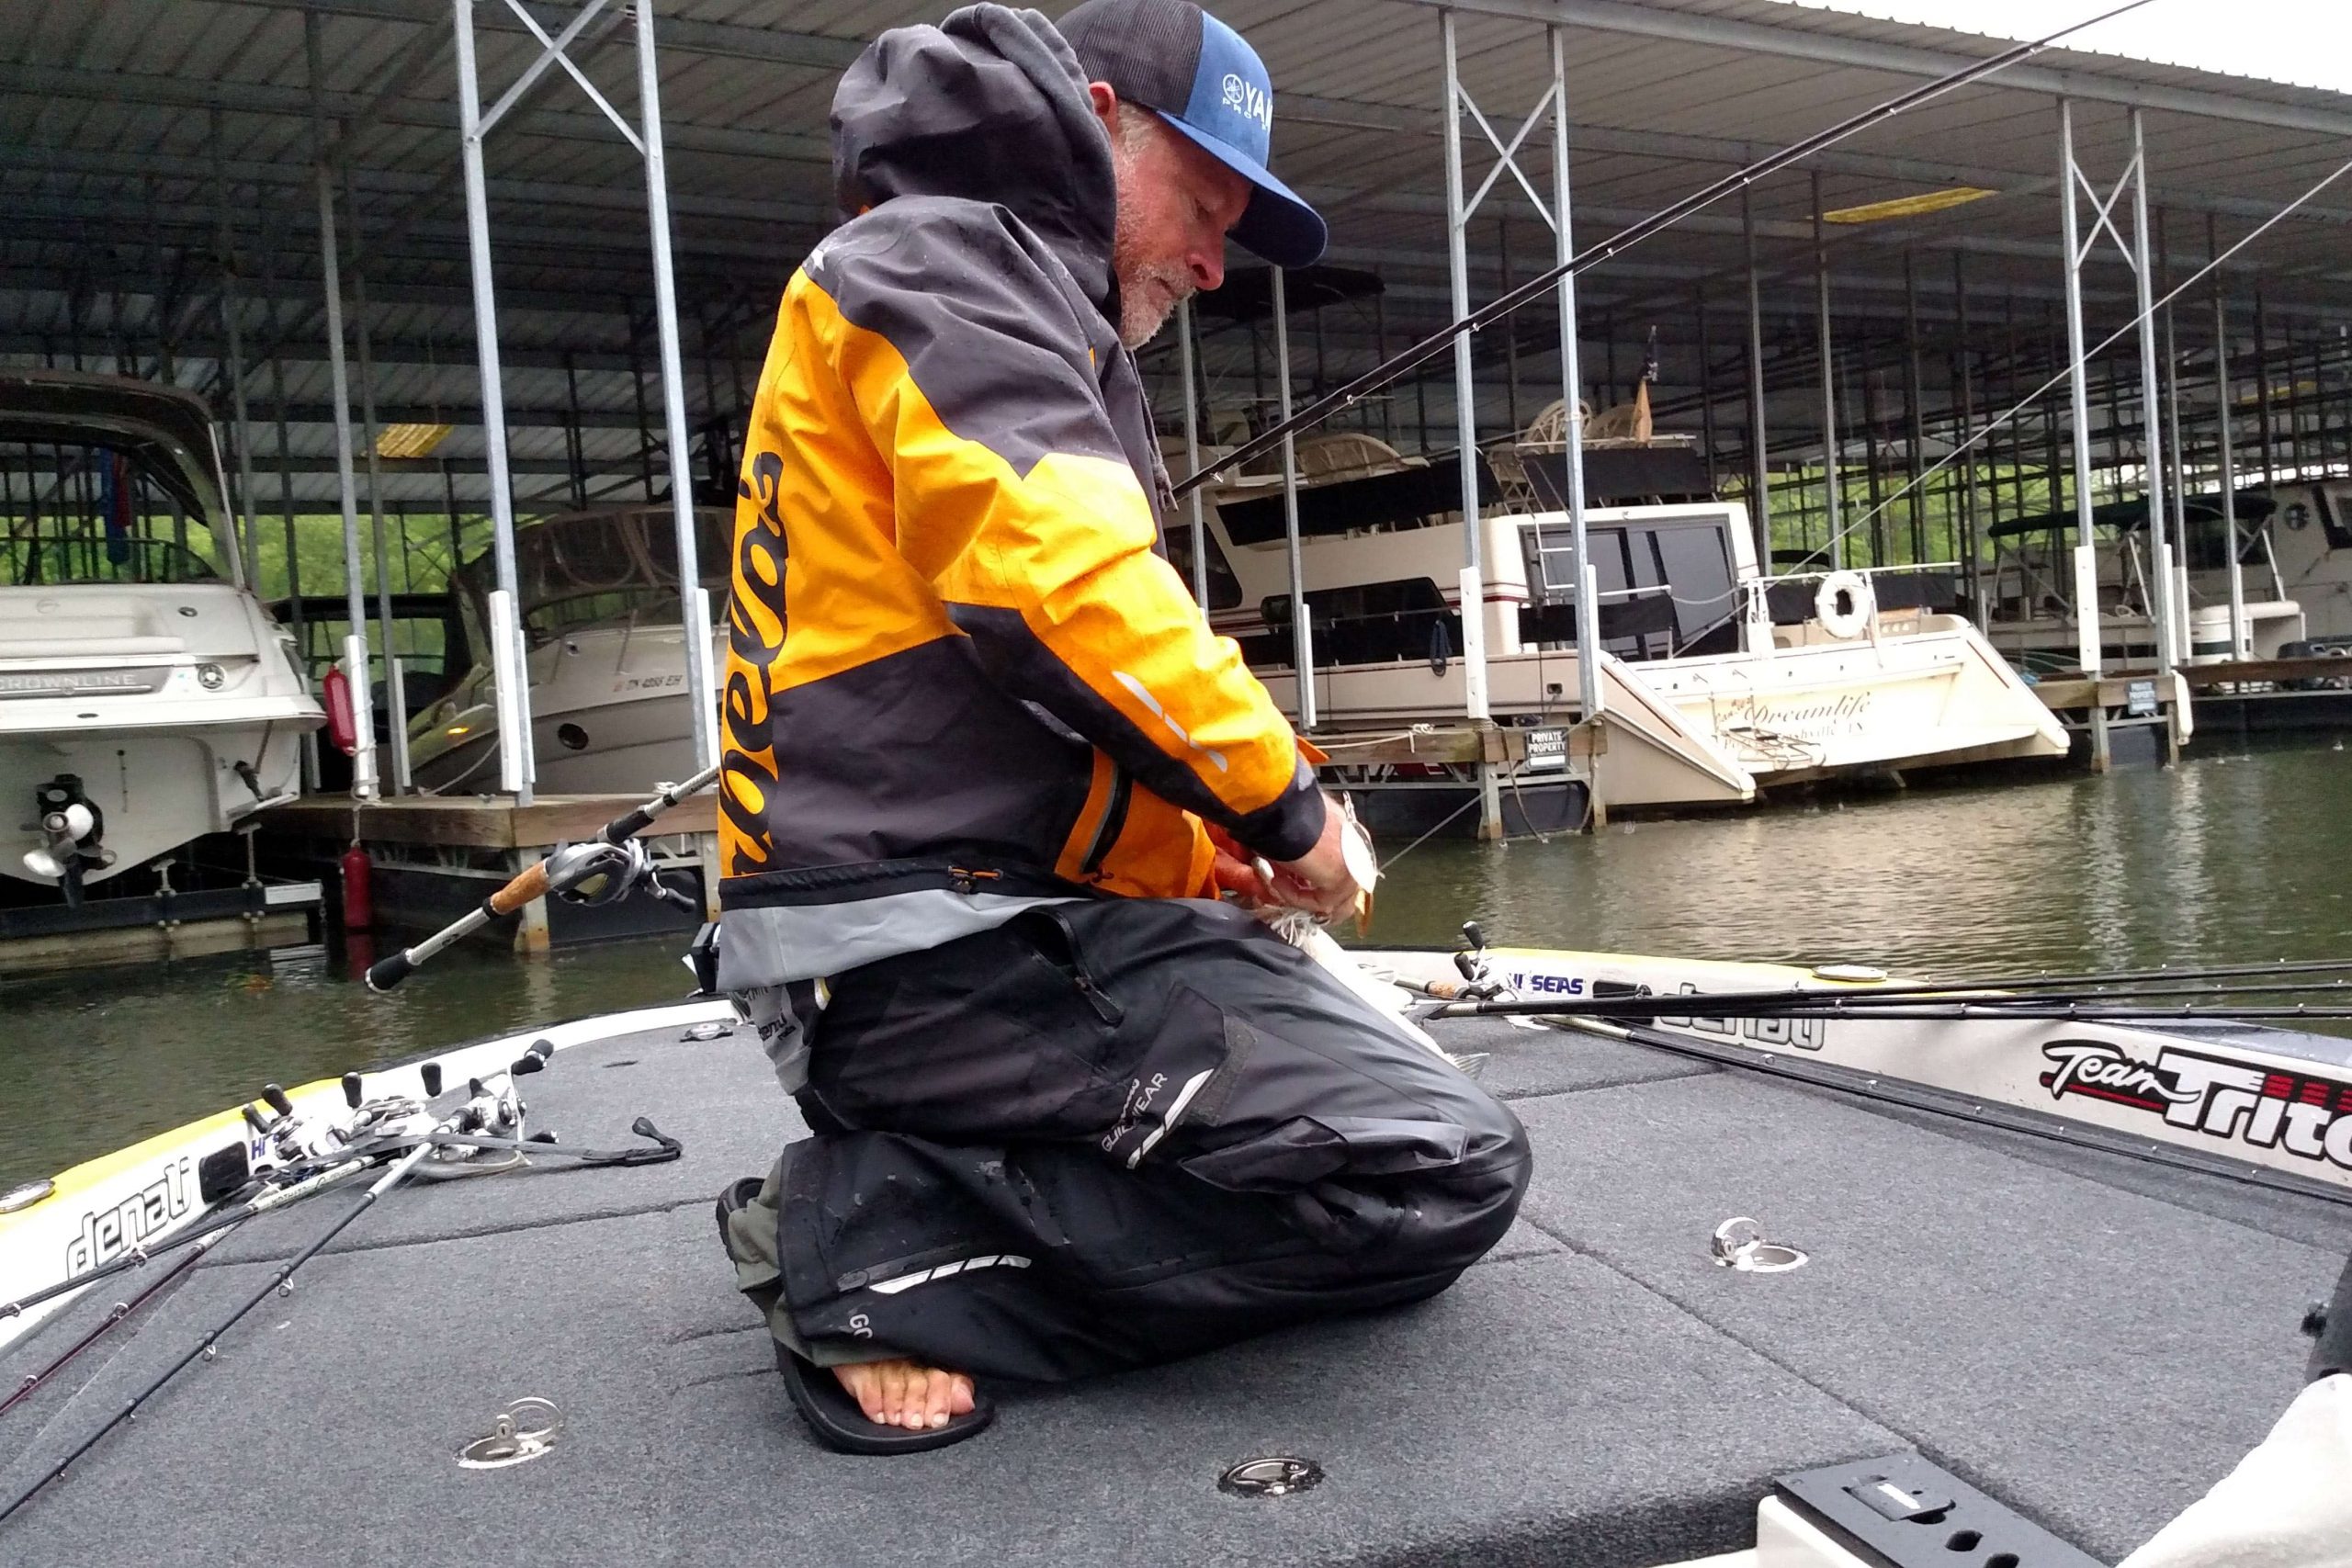 Jeff Kreit is off to a fast start, first cast and a keeper is in the boat.